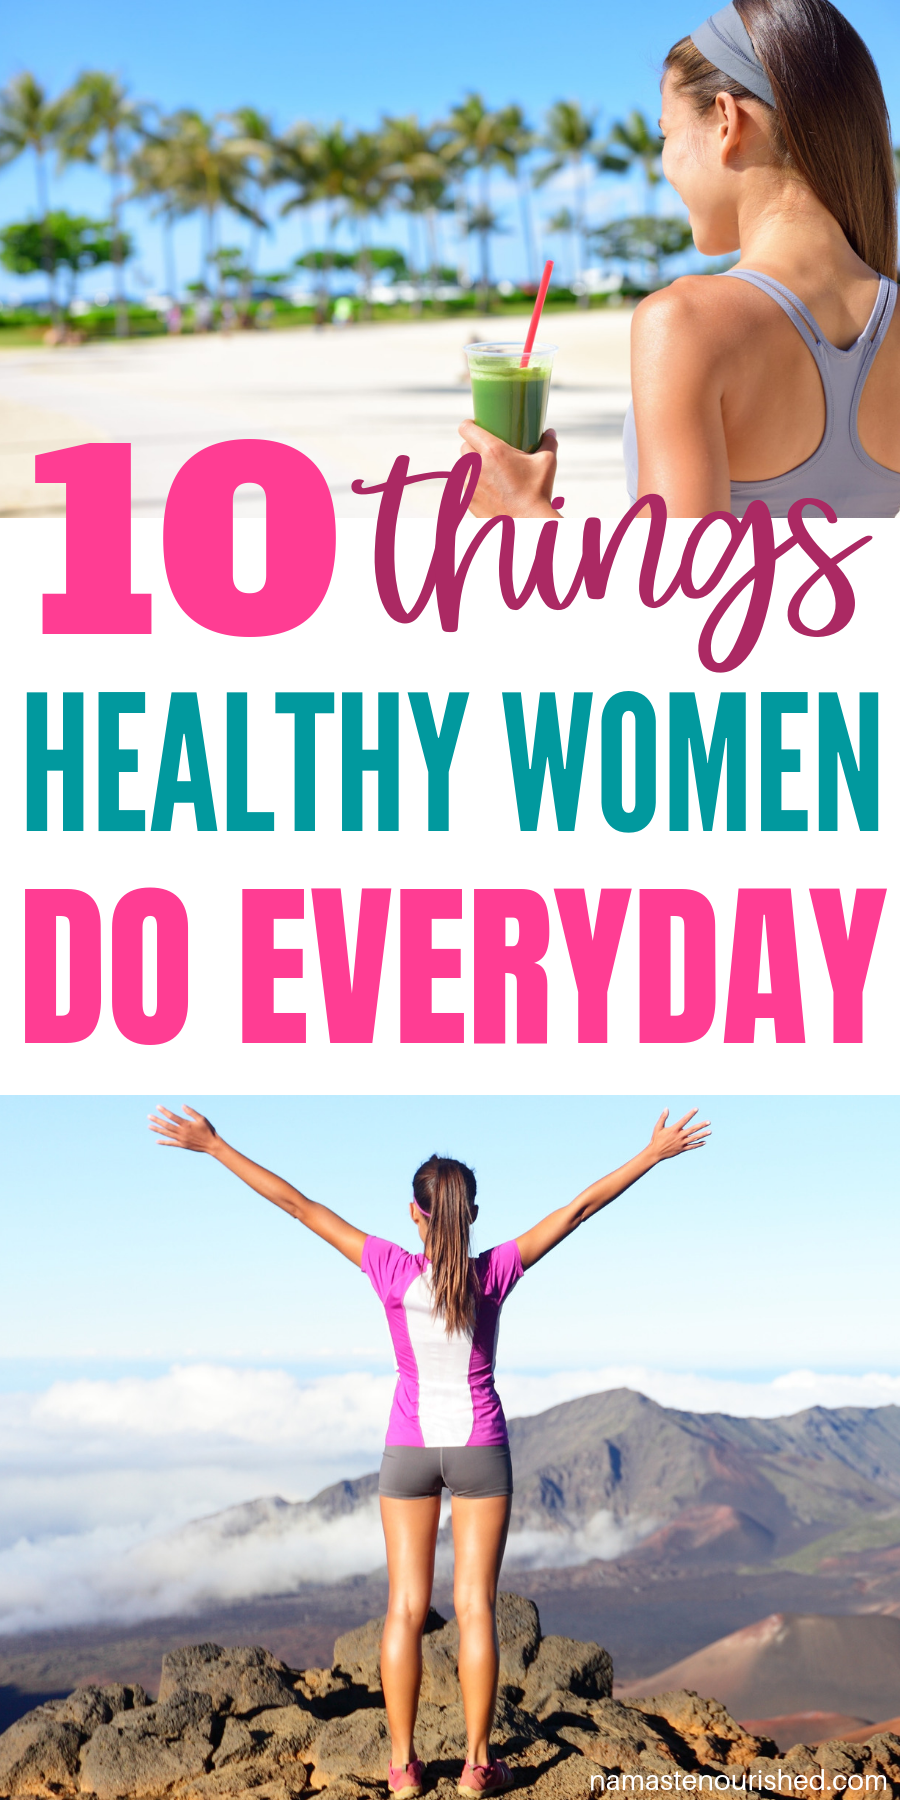 10 Things Healthy Women Do Every Day - Namaste Nourished - 10 Things Healthy Women Do Every Day - Namaste Nourished -   17 beauty Life lifestyle ideas